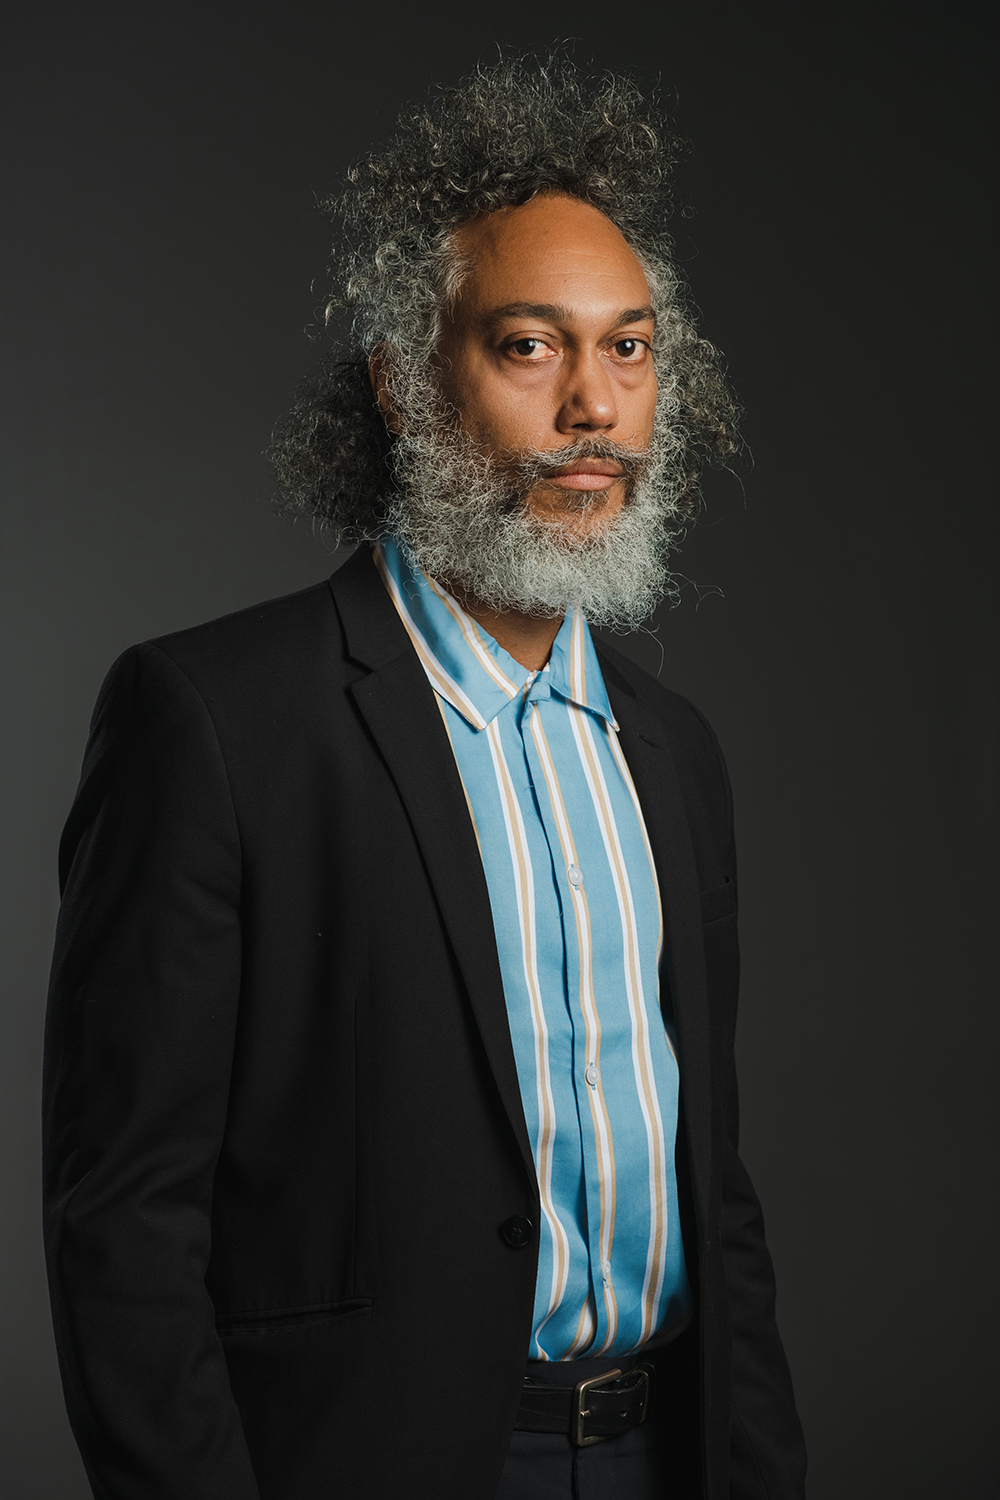 Color photograph of a dark skinned man with gray hair and beard wearing a dark blazer over a blue shirt; he looks at the camera with a serious expression